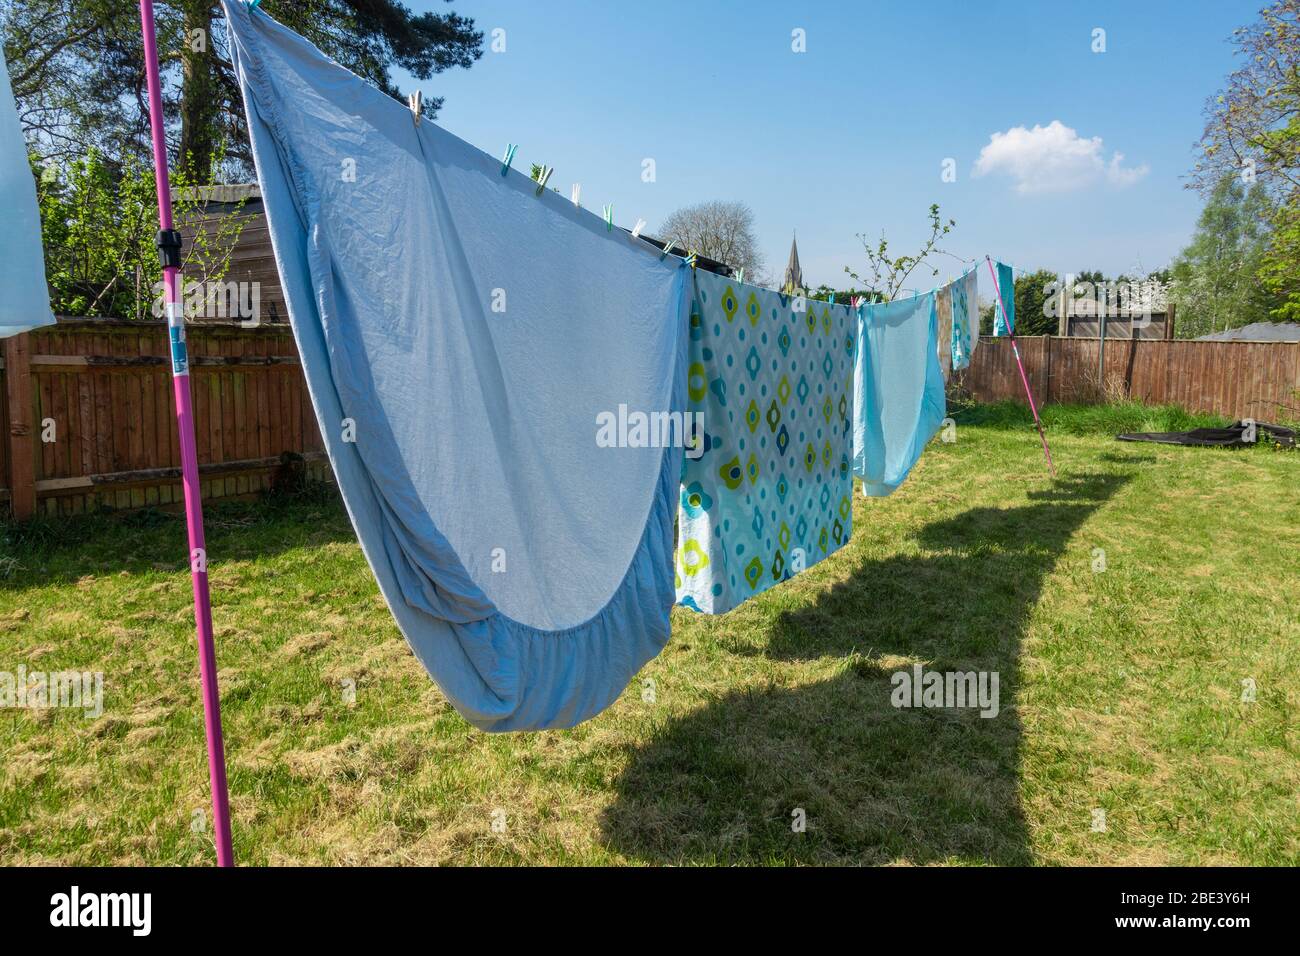 Bedding and sheets are freshly laundered and are hanging out to dry on a washing line in residential back garden. Stock Photo